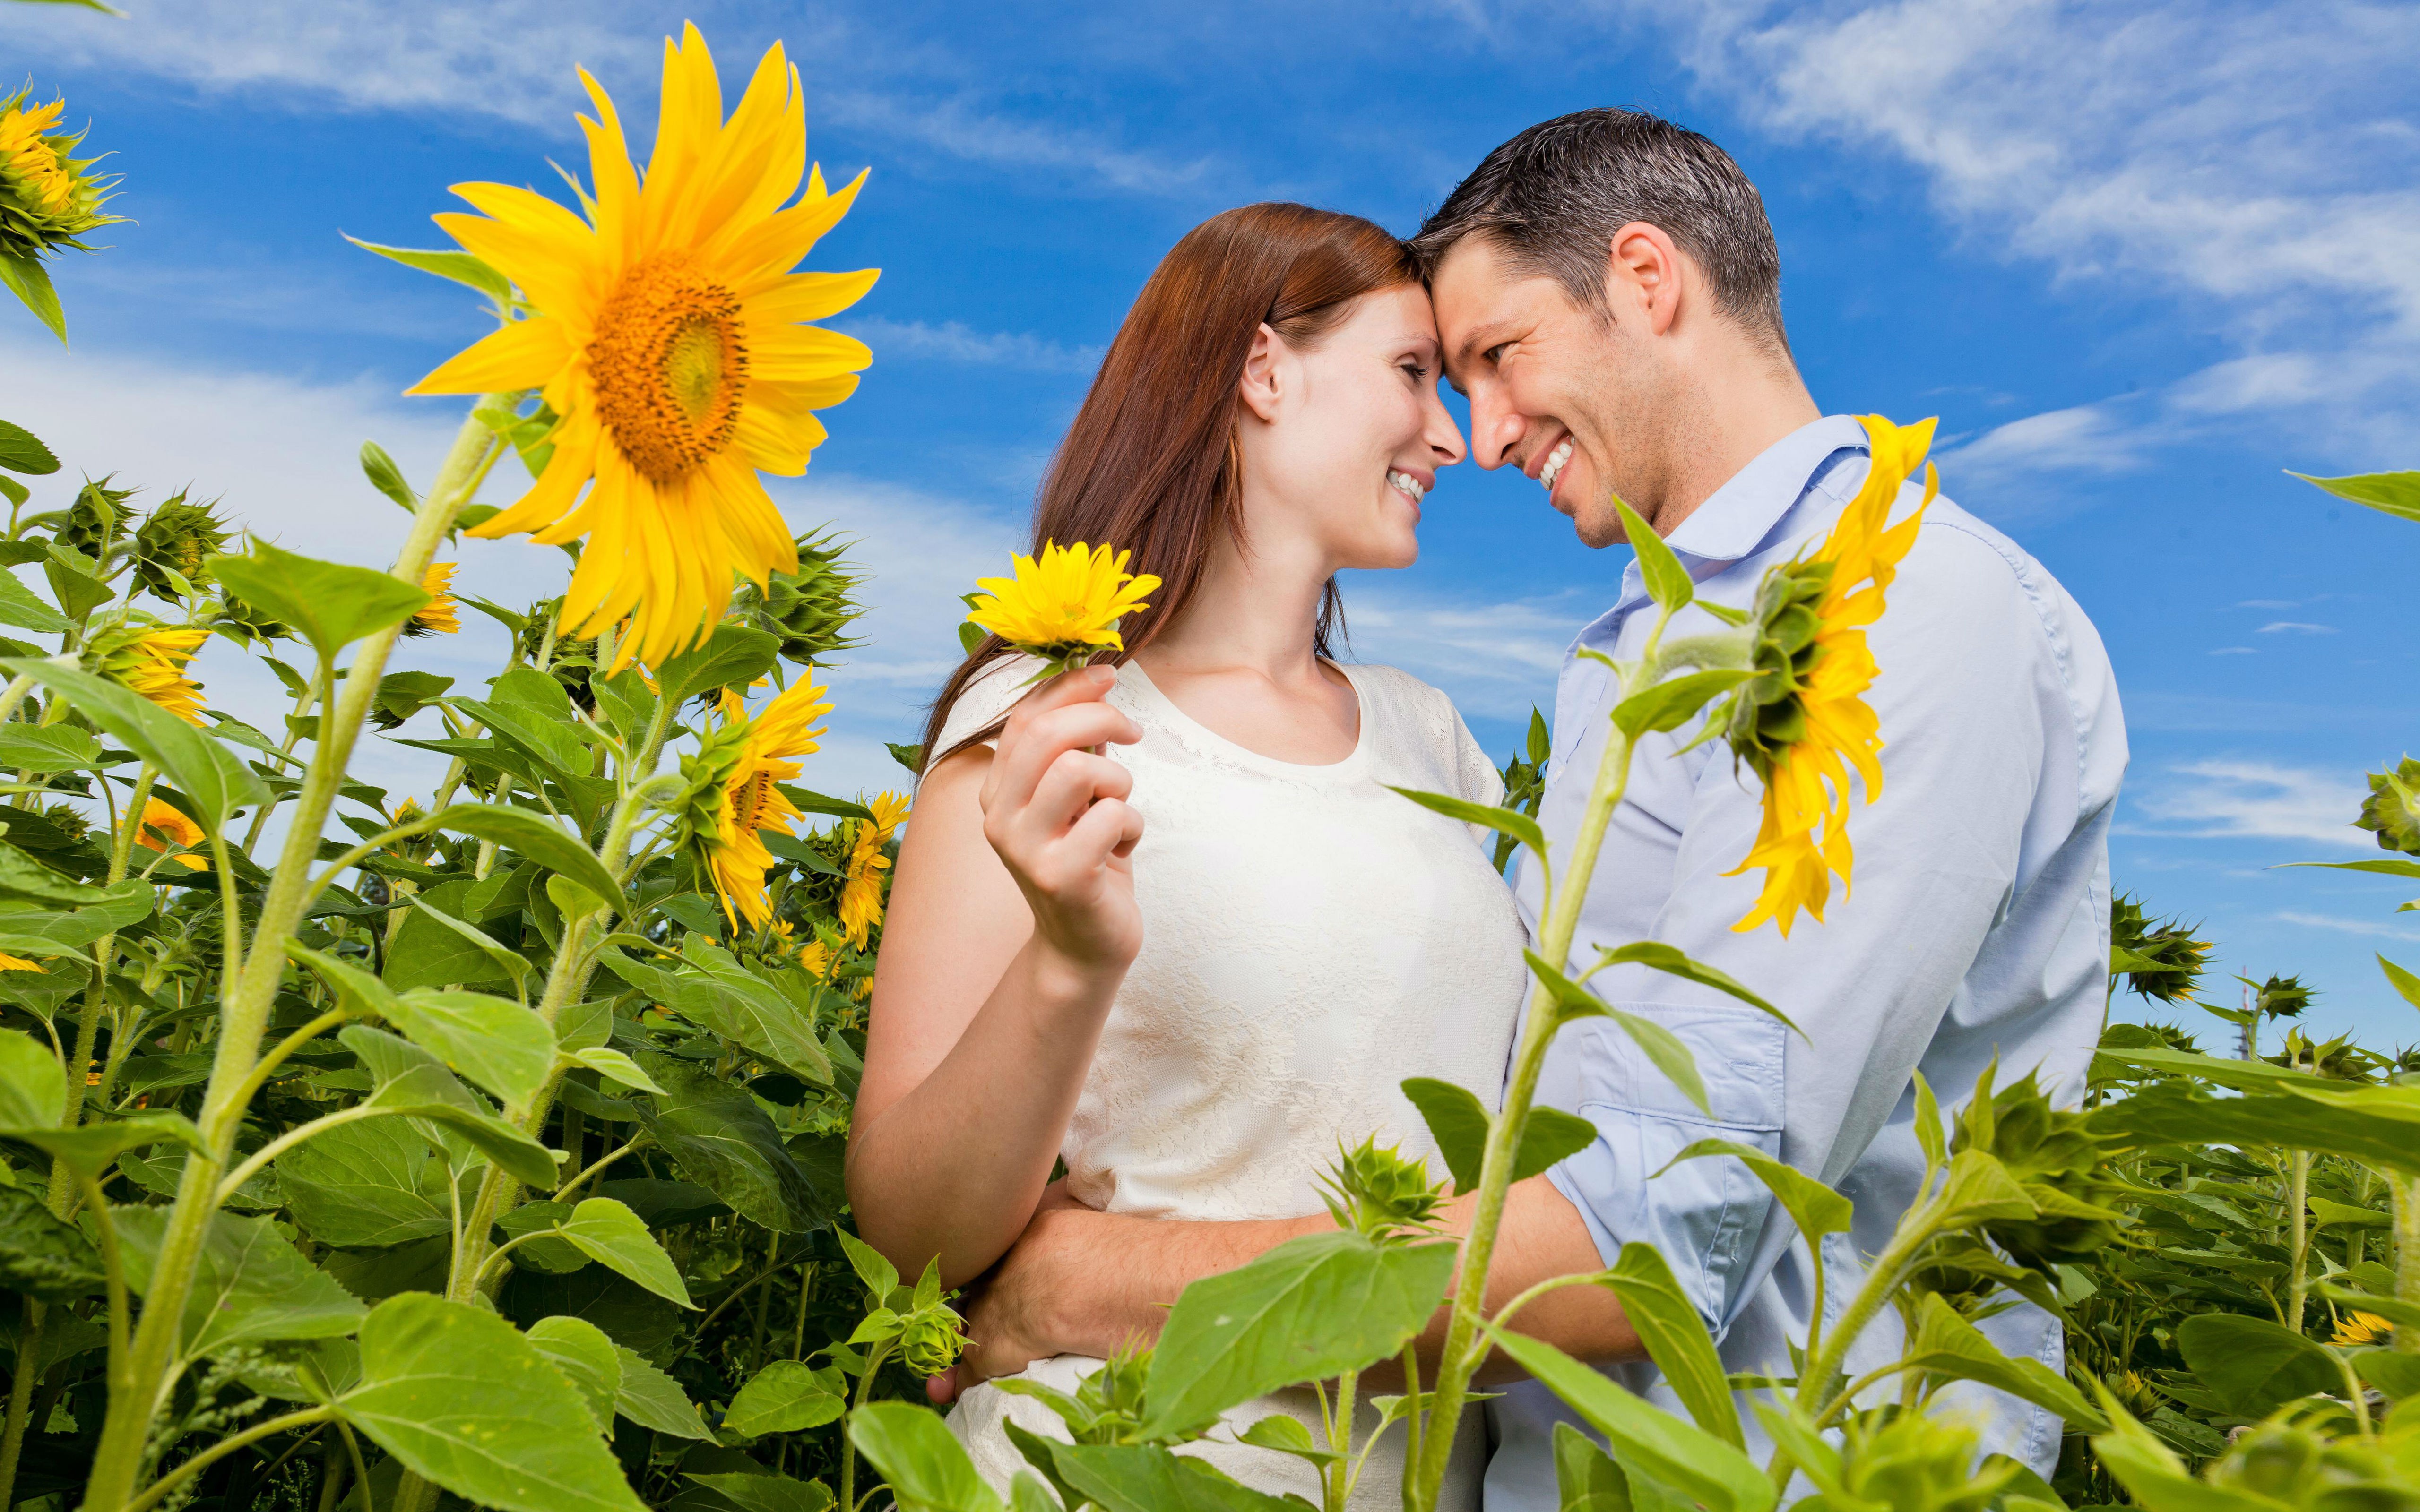 love couple in sunflower garden free awesome image for mobile